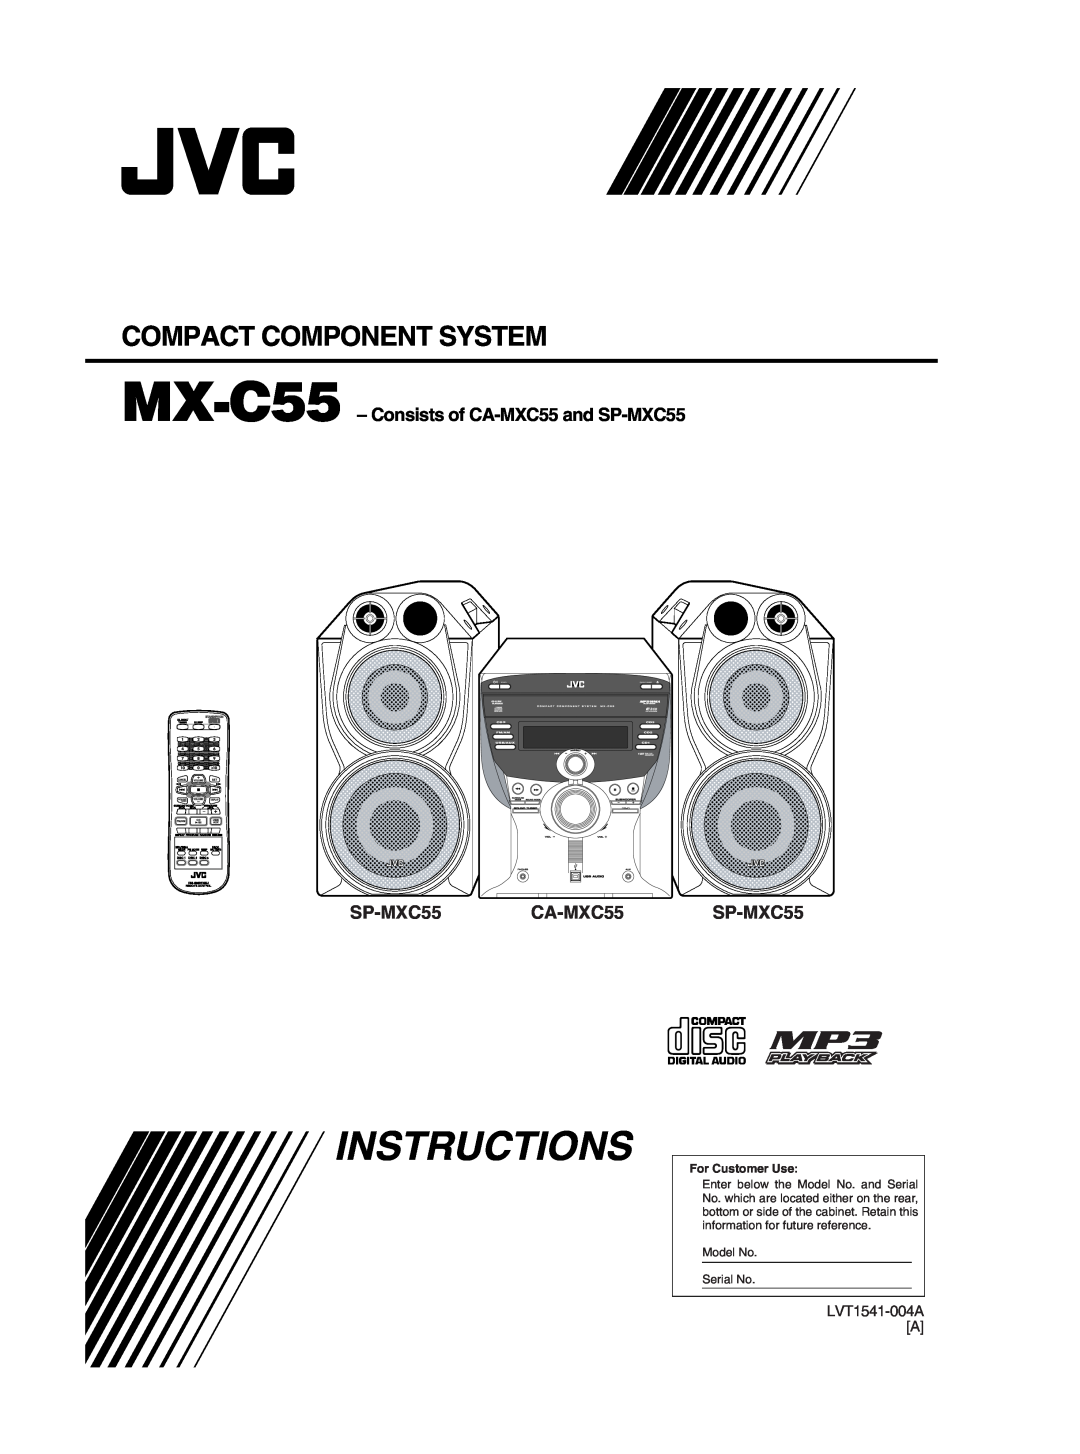 JVC manual Instructions, Compact Component System, MX-C55 - Consists of CA-MXC55and SP-MXC55, LVT1541-004AA, Fm/Am 